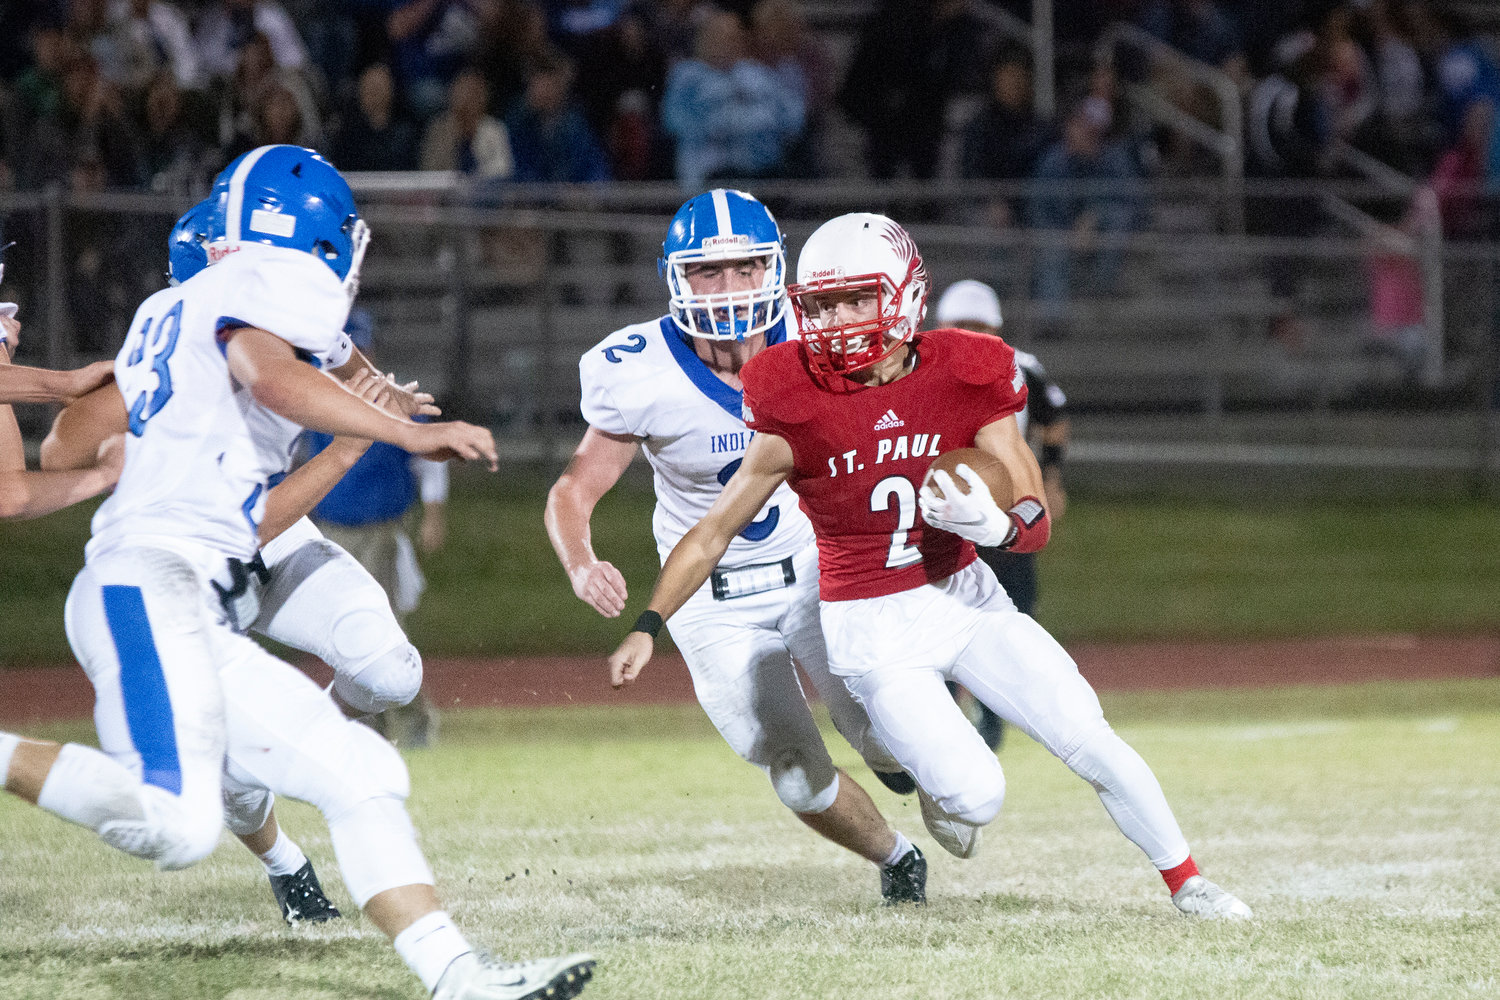 The last time the St. Paul Cardinals faced Sacred Heart twice in one season was in 2012, when the Indians won the regular season but the Cardinals won in the playoffs. St. Paul hopes to repeat history this Saturday.